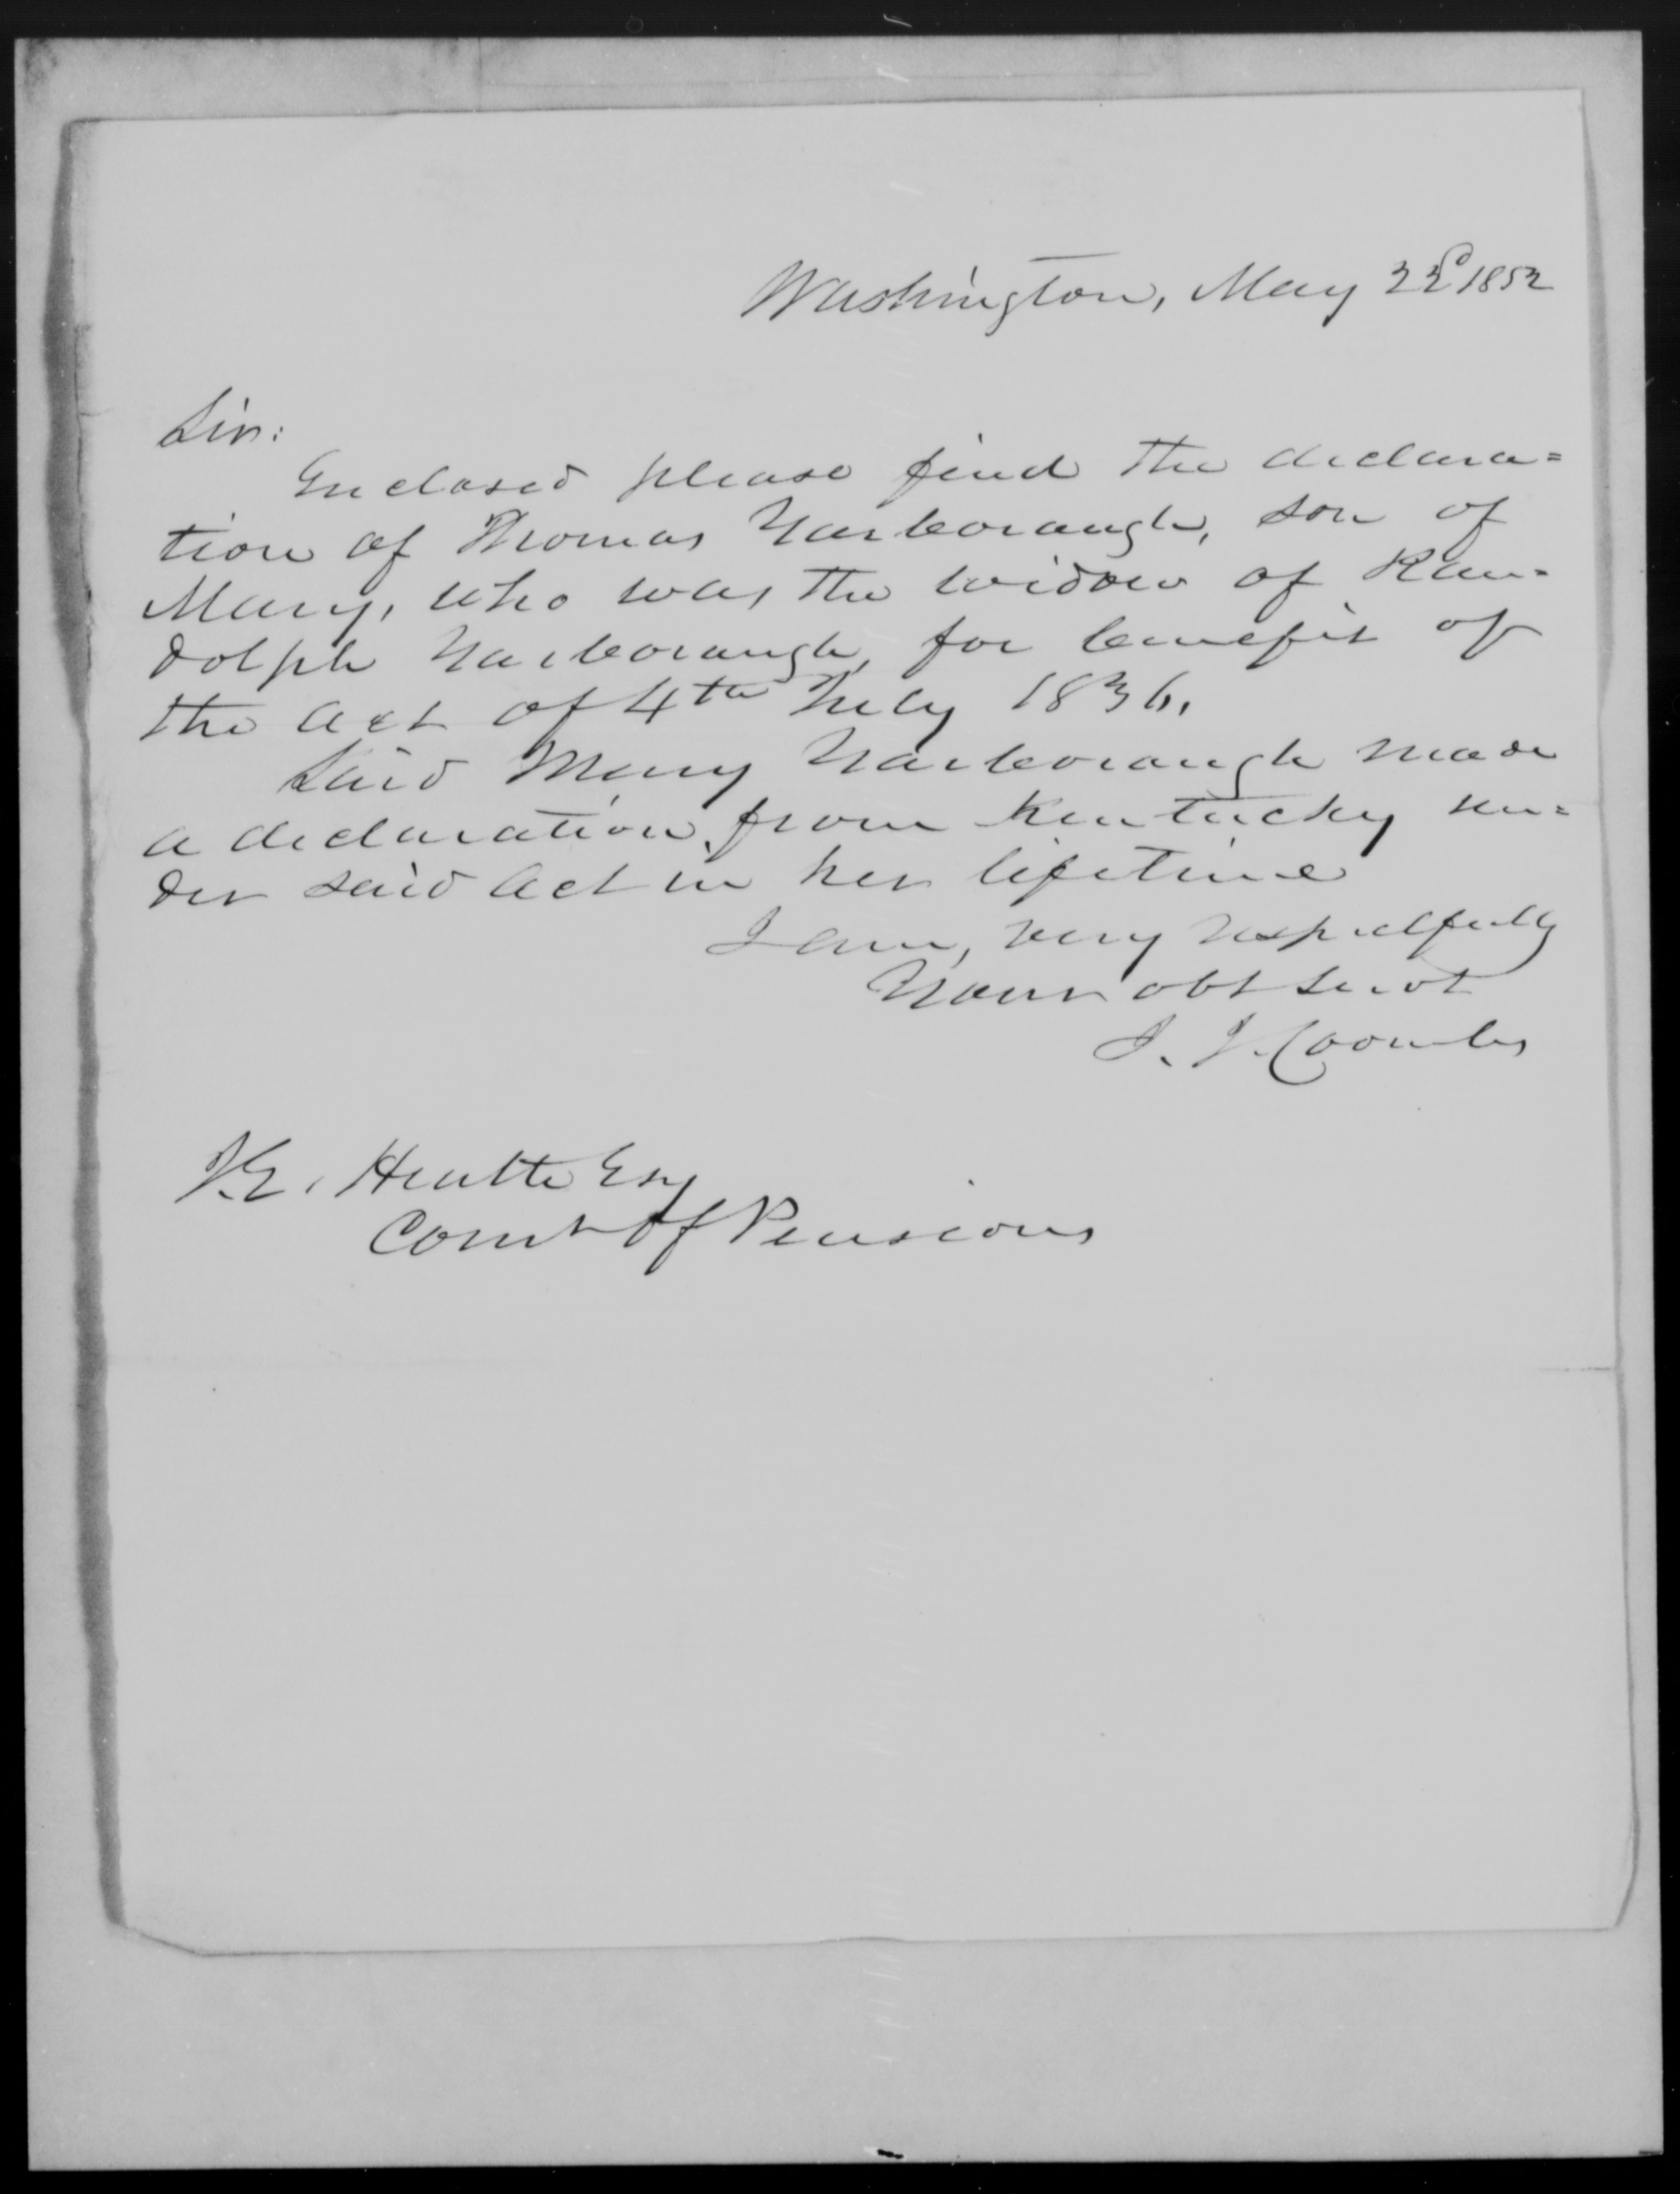 Letter from J. J. Combs to James Ewell Heath, 22 May 1852